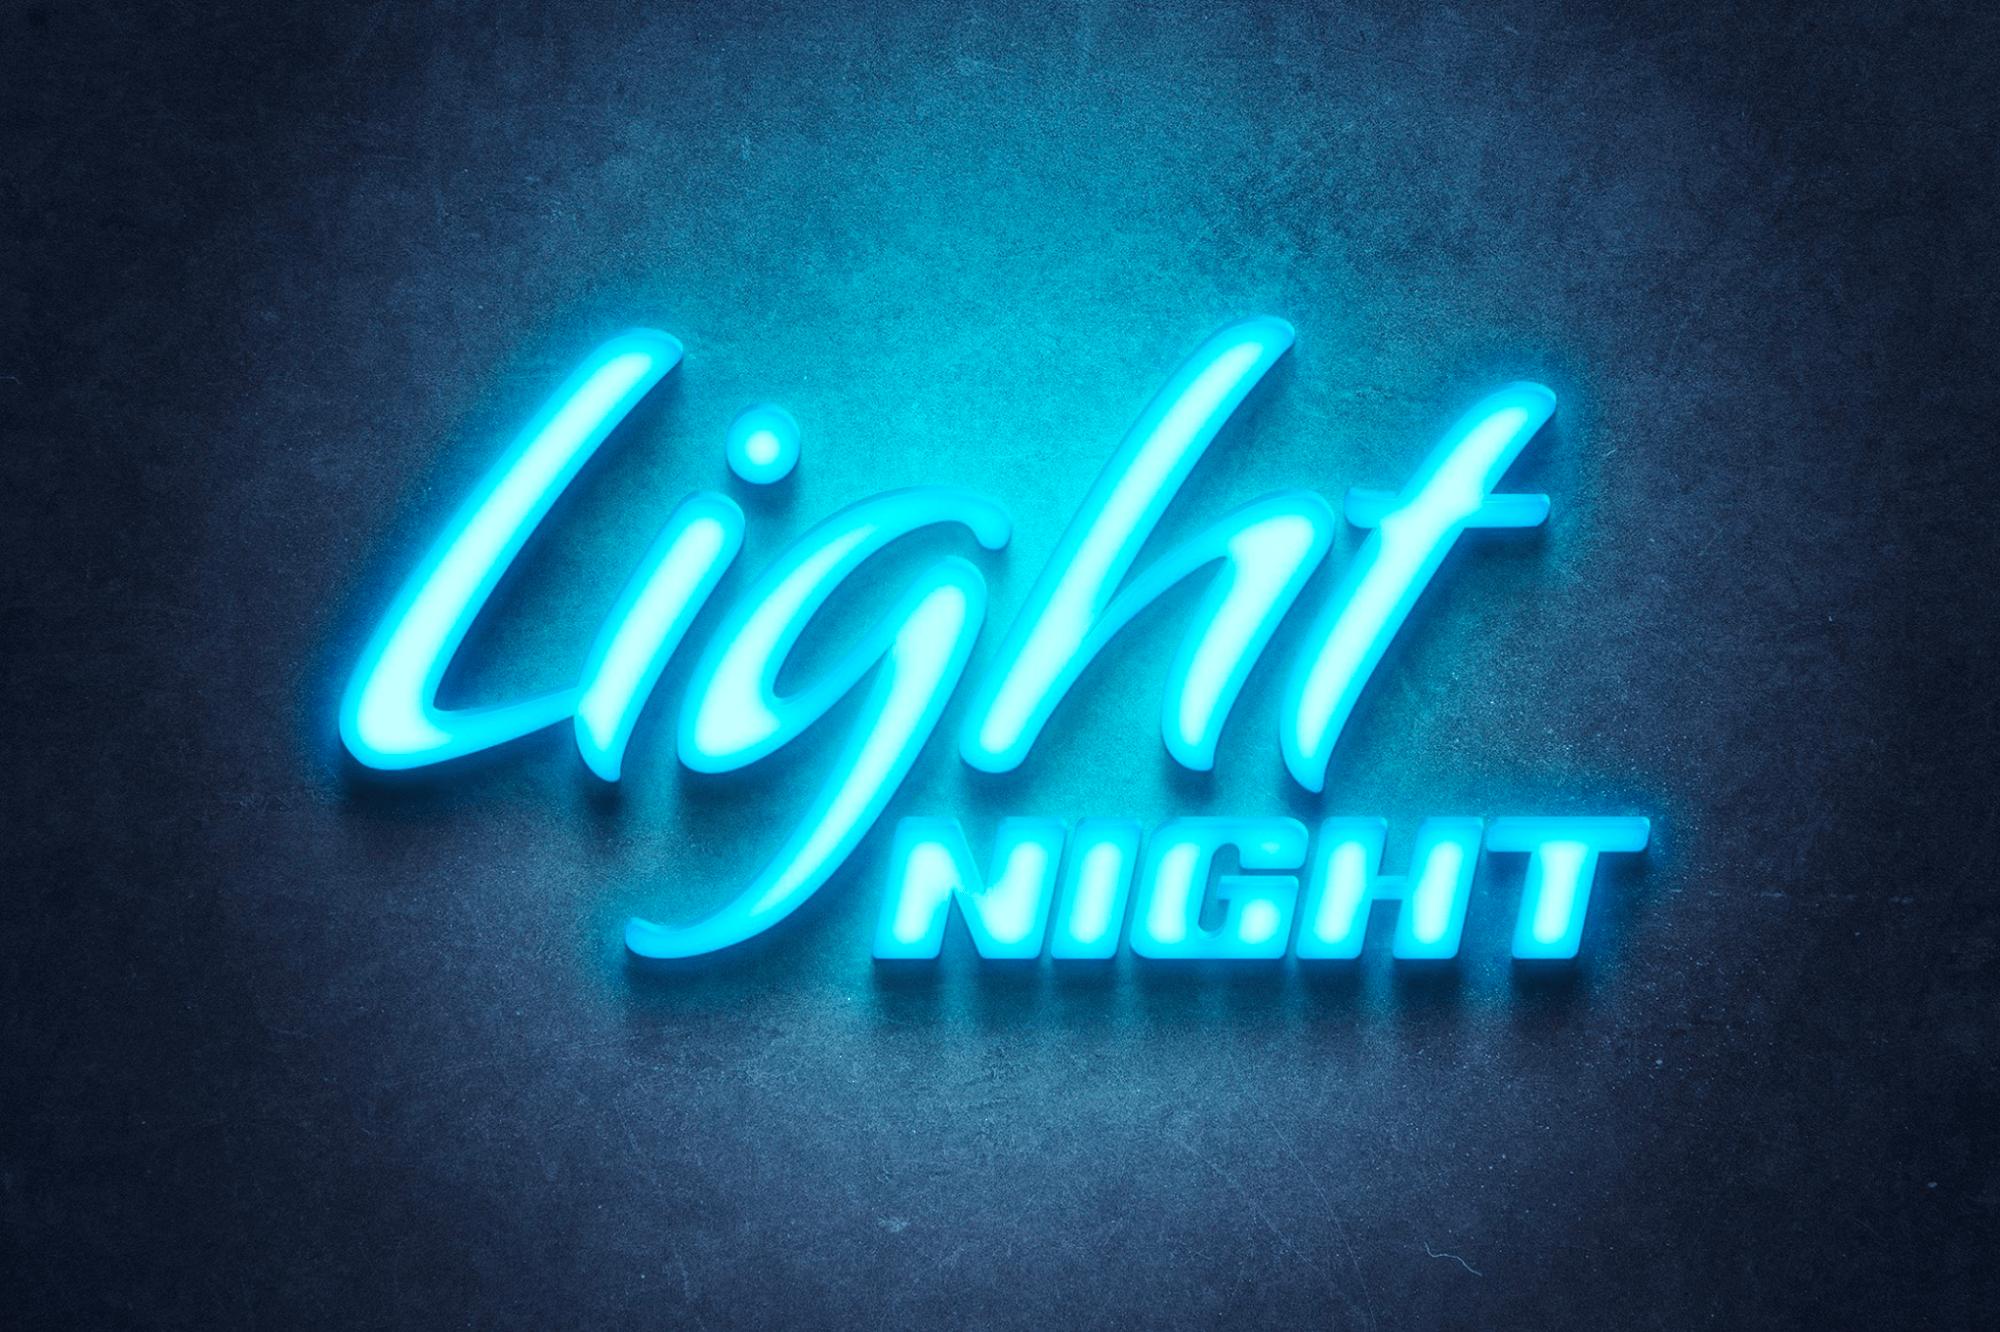 Neon sign effect showcasing 'Light Night' in icy blue tones on a textured dark background, perfect for a logo presentation.